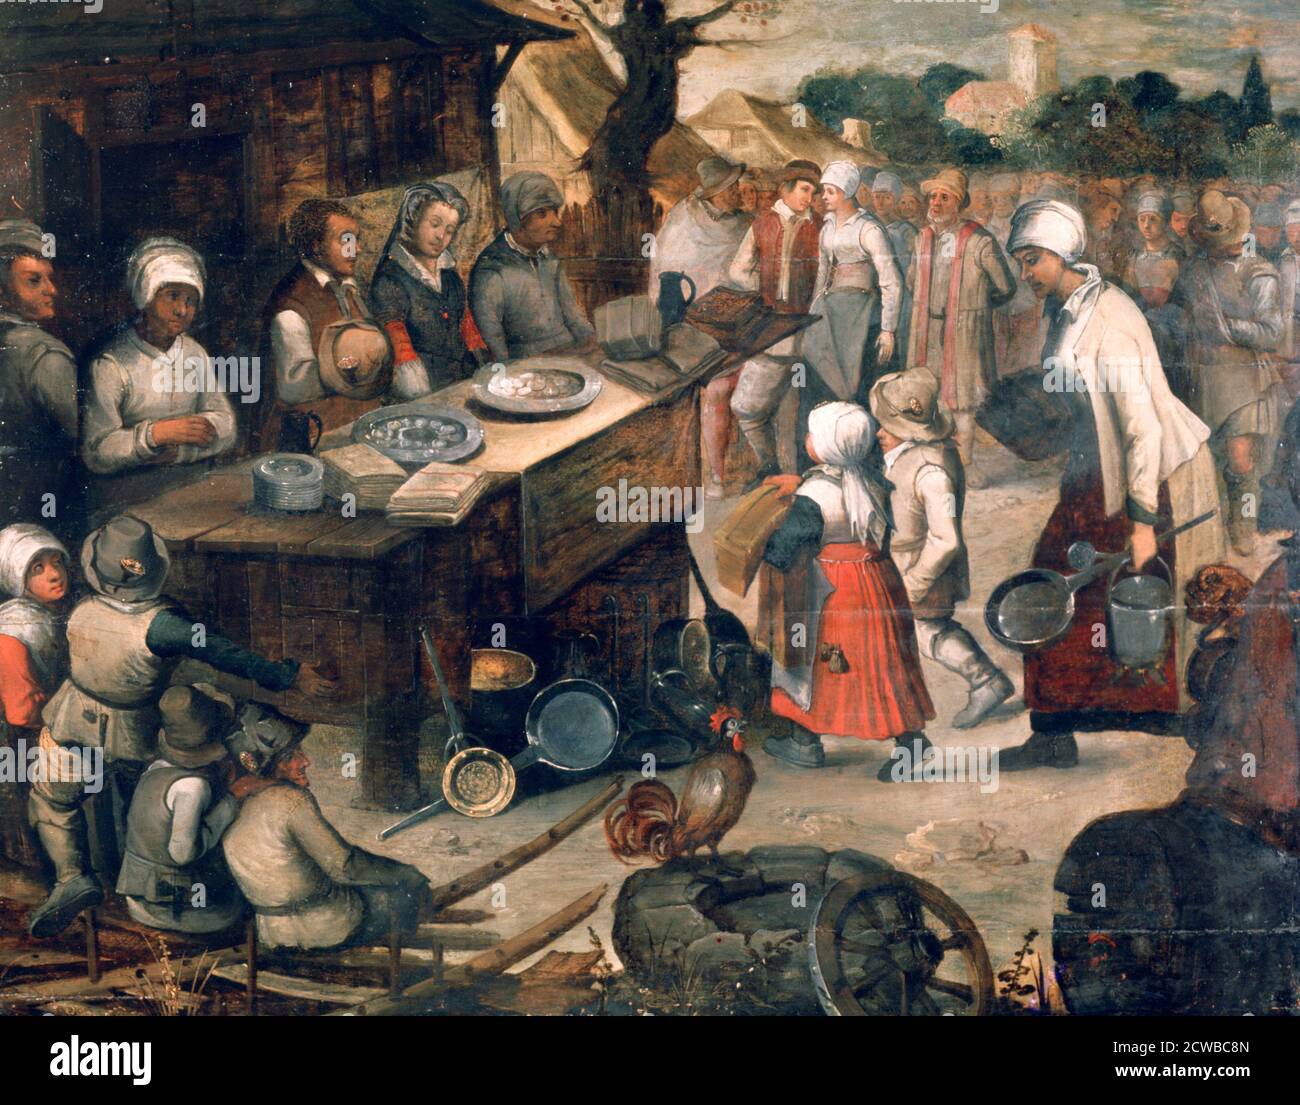 The Presentation of Gifts' by Pieter Brueghel the Younger, c1584-1638. From a private collection. Stock Photo